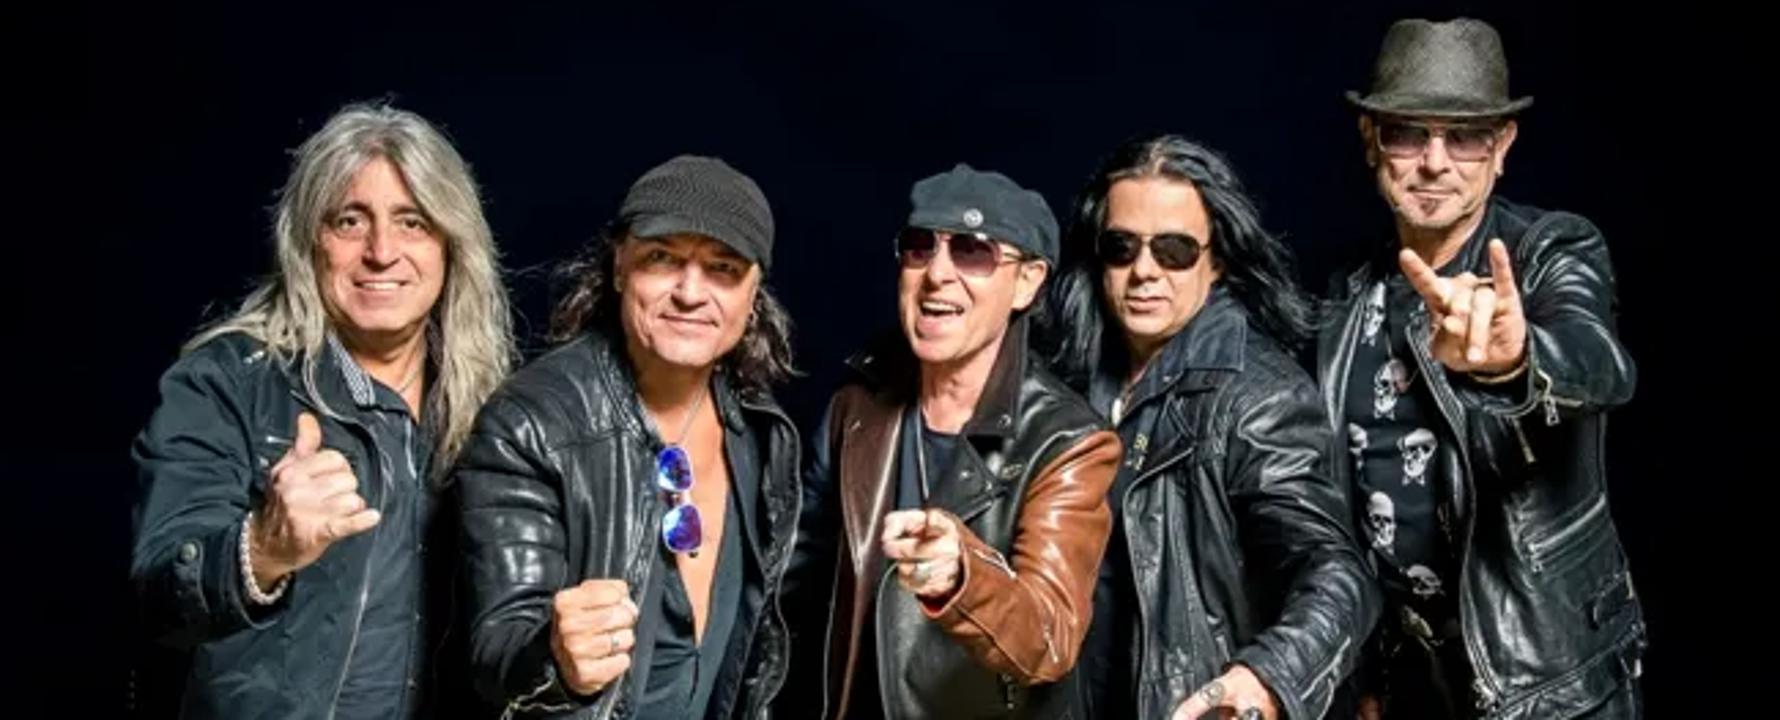 Promotional photograph of Scorpions.